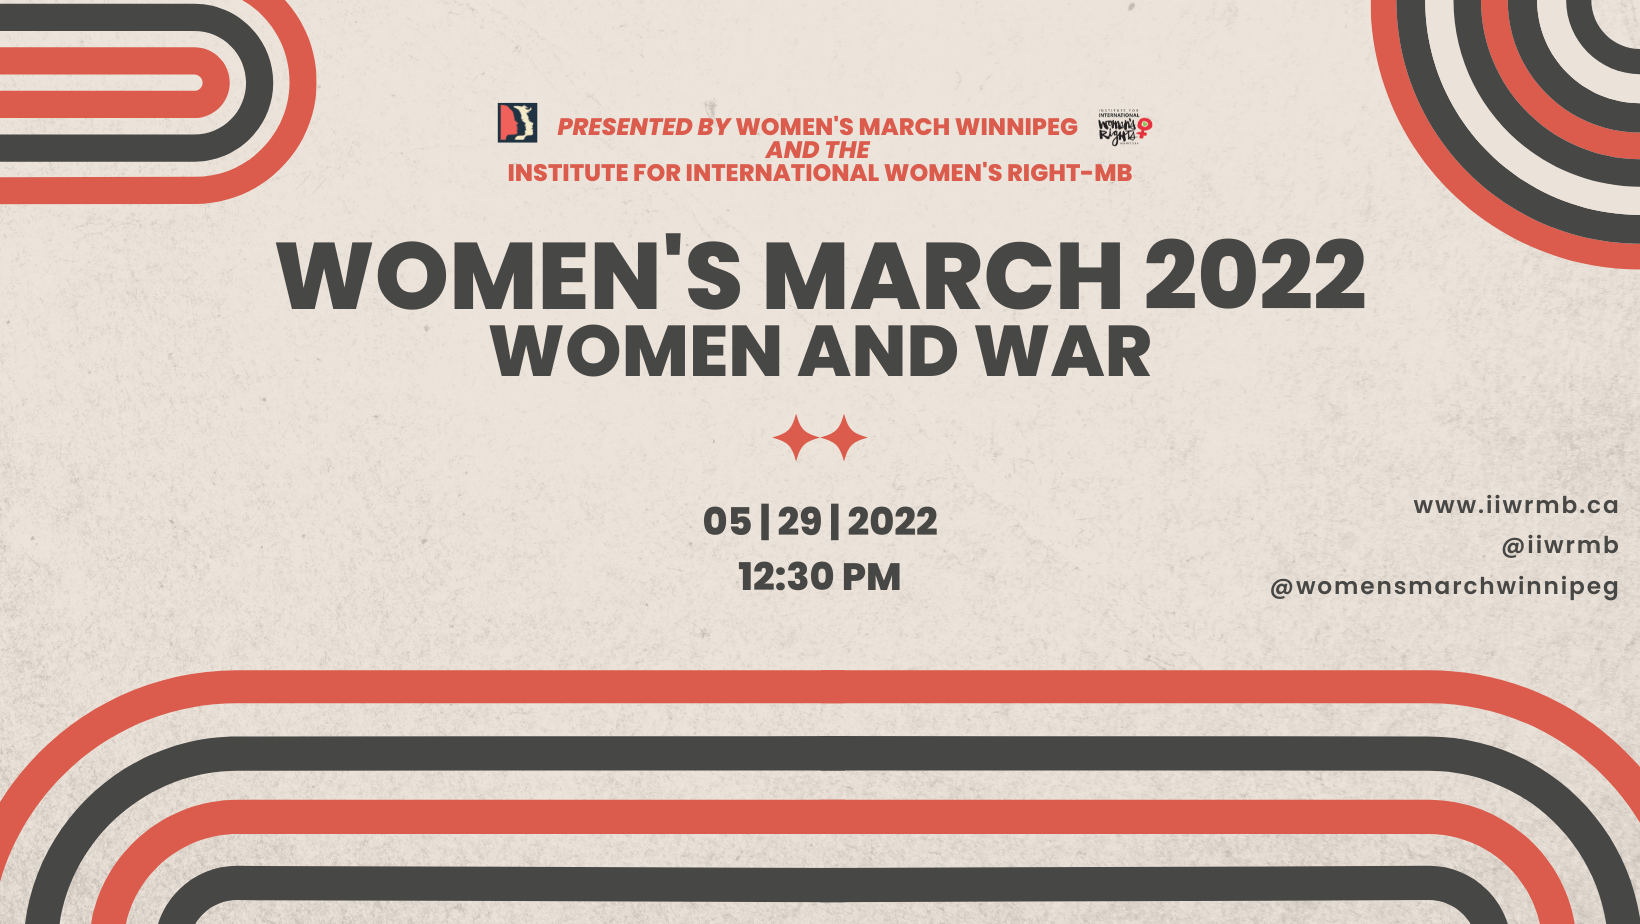 Beige background with red-orange & black curved lines that give a 70s aesthetic. The text reads: Women’s March 2022: Women and War. 05 | 29 | 2022. 12:30 PM. Presented by Women’s March Winnipeg and the Insitute for International Women’s Rights - MB. www.iiwrmb.ca. @iiwrmb. @womensmarchwinnipeg.